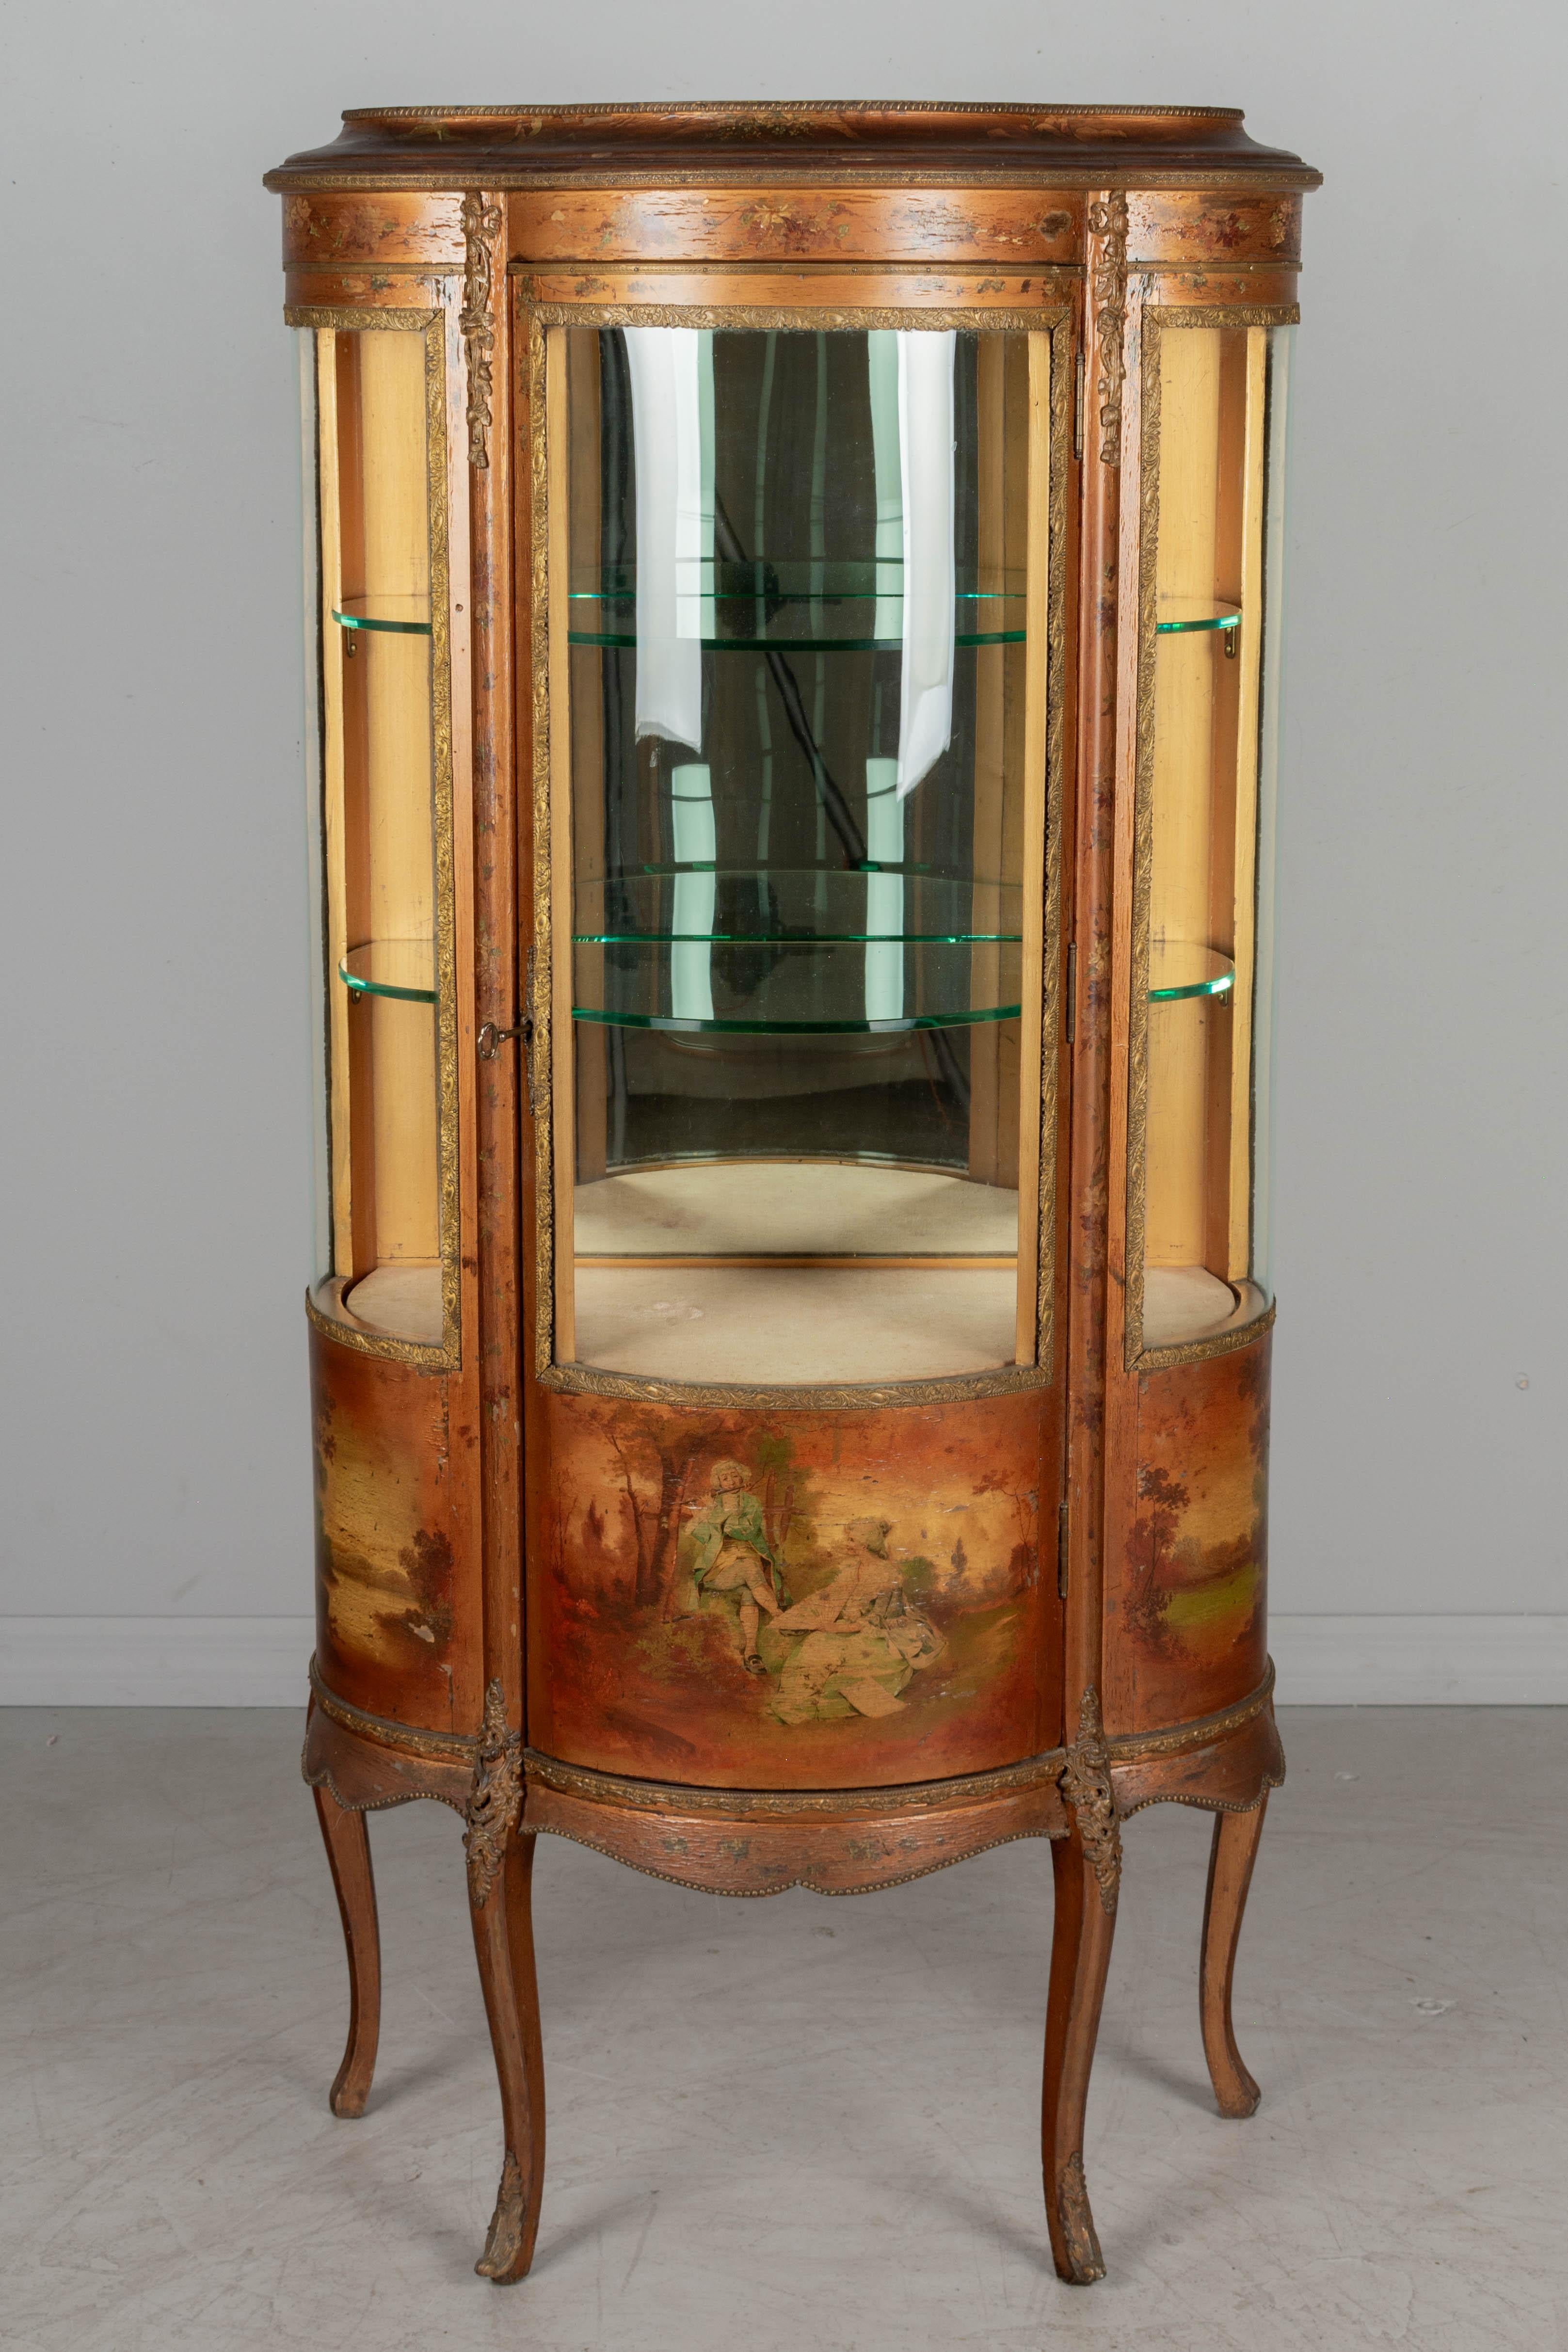 A 19th century French Louis XIV style Vernis Martin vitrine with hand painted panels, cast bronze mounts and curved glass. Raised on cabriole legs with foliate cast brass trim throughout. Giltwood construction with single door opening to interior